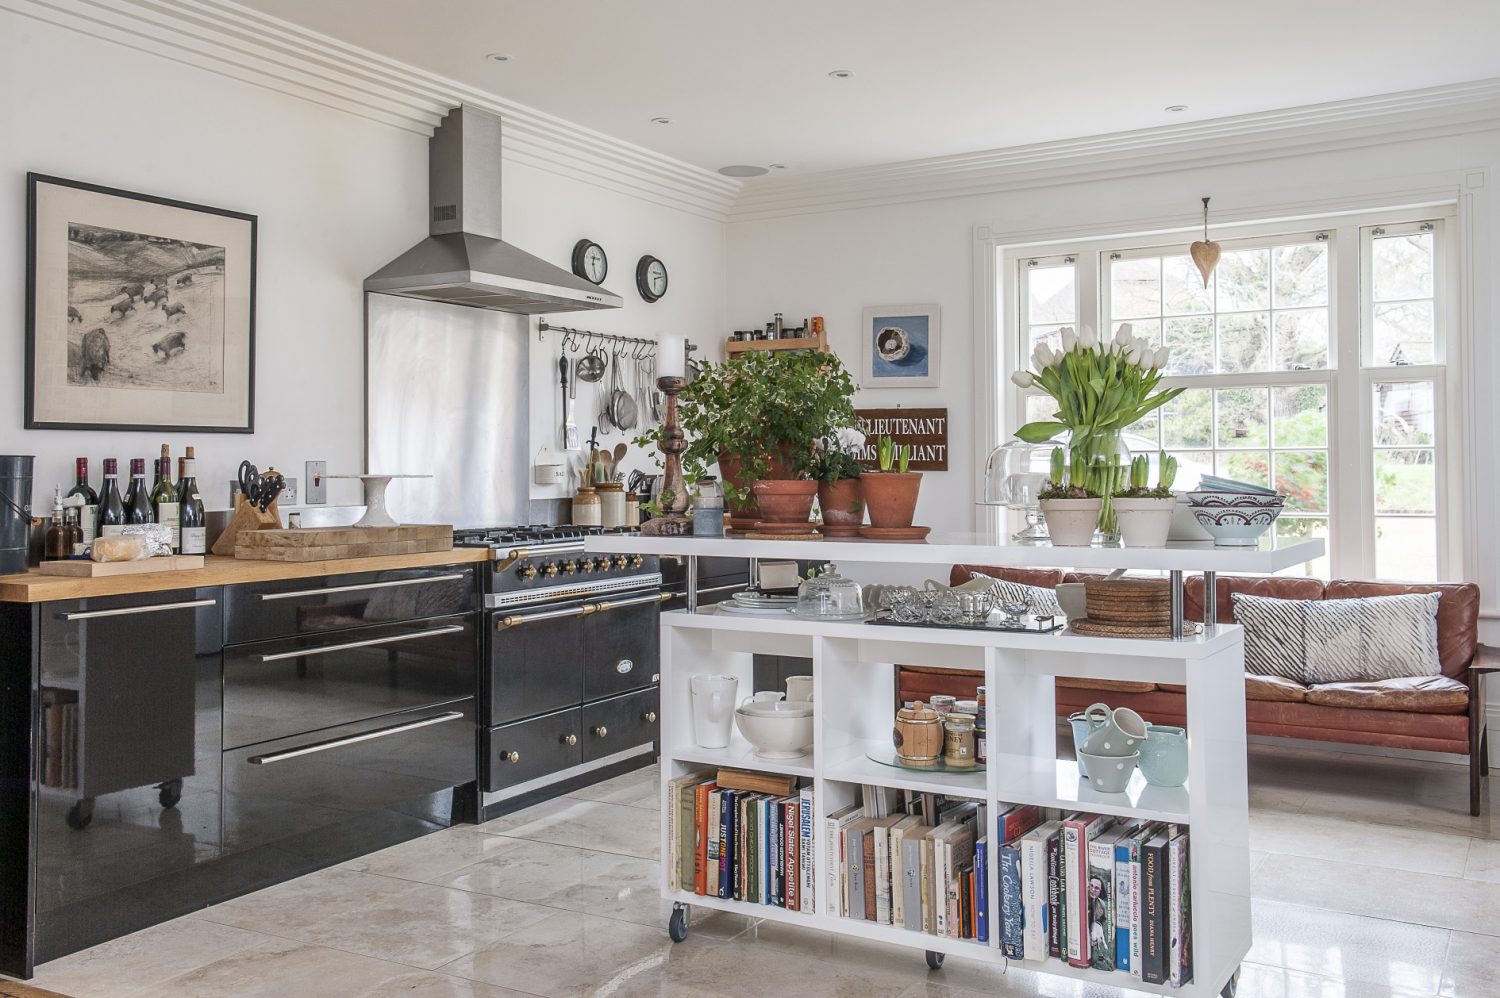 The marble floor tiles were the only feature of the kitchen in place when the Smiths bought their home. They added minimalist off-the-shelf kitchen units and a clever, mobile kitchen unit which can be moved to create more space if necessary